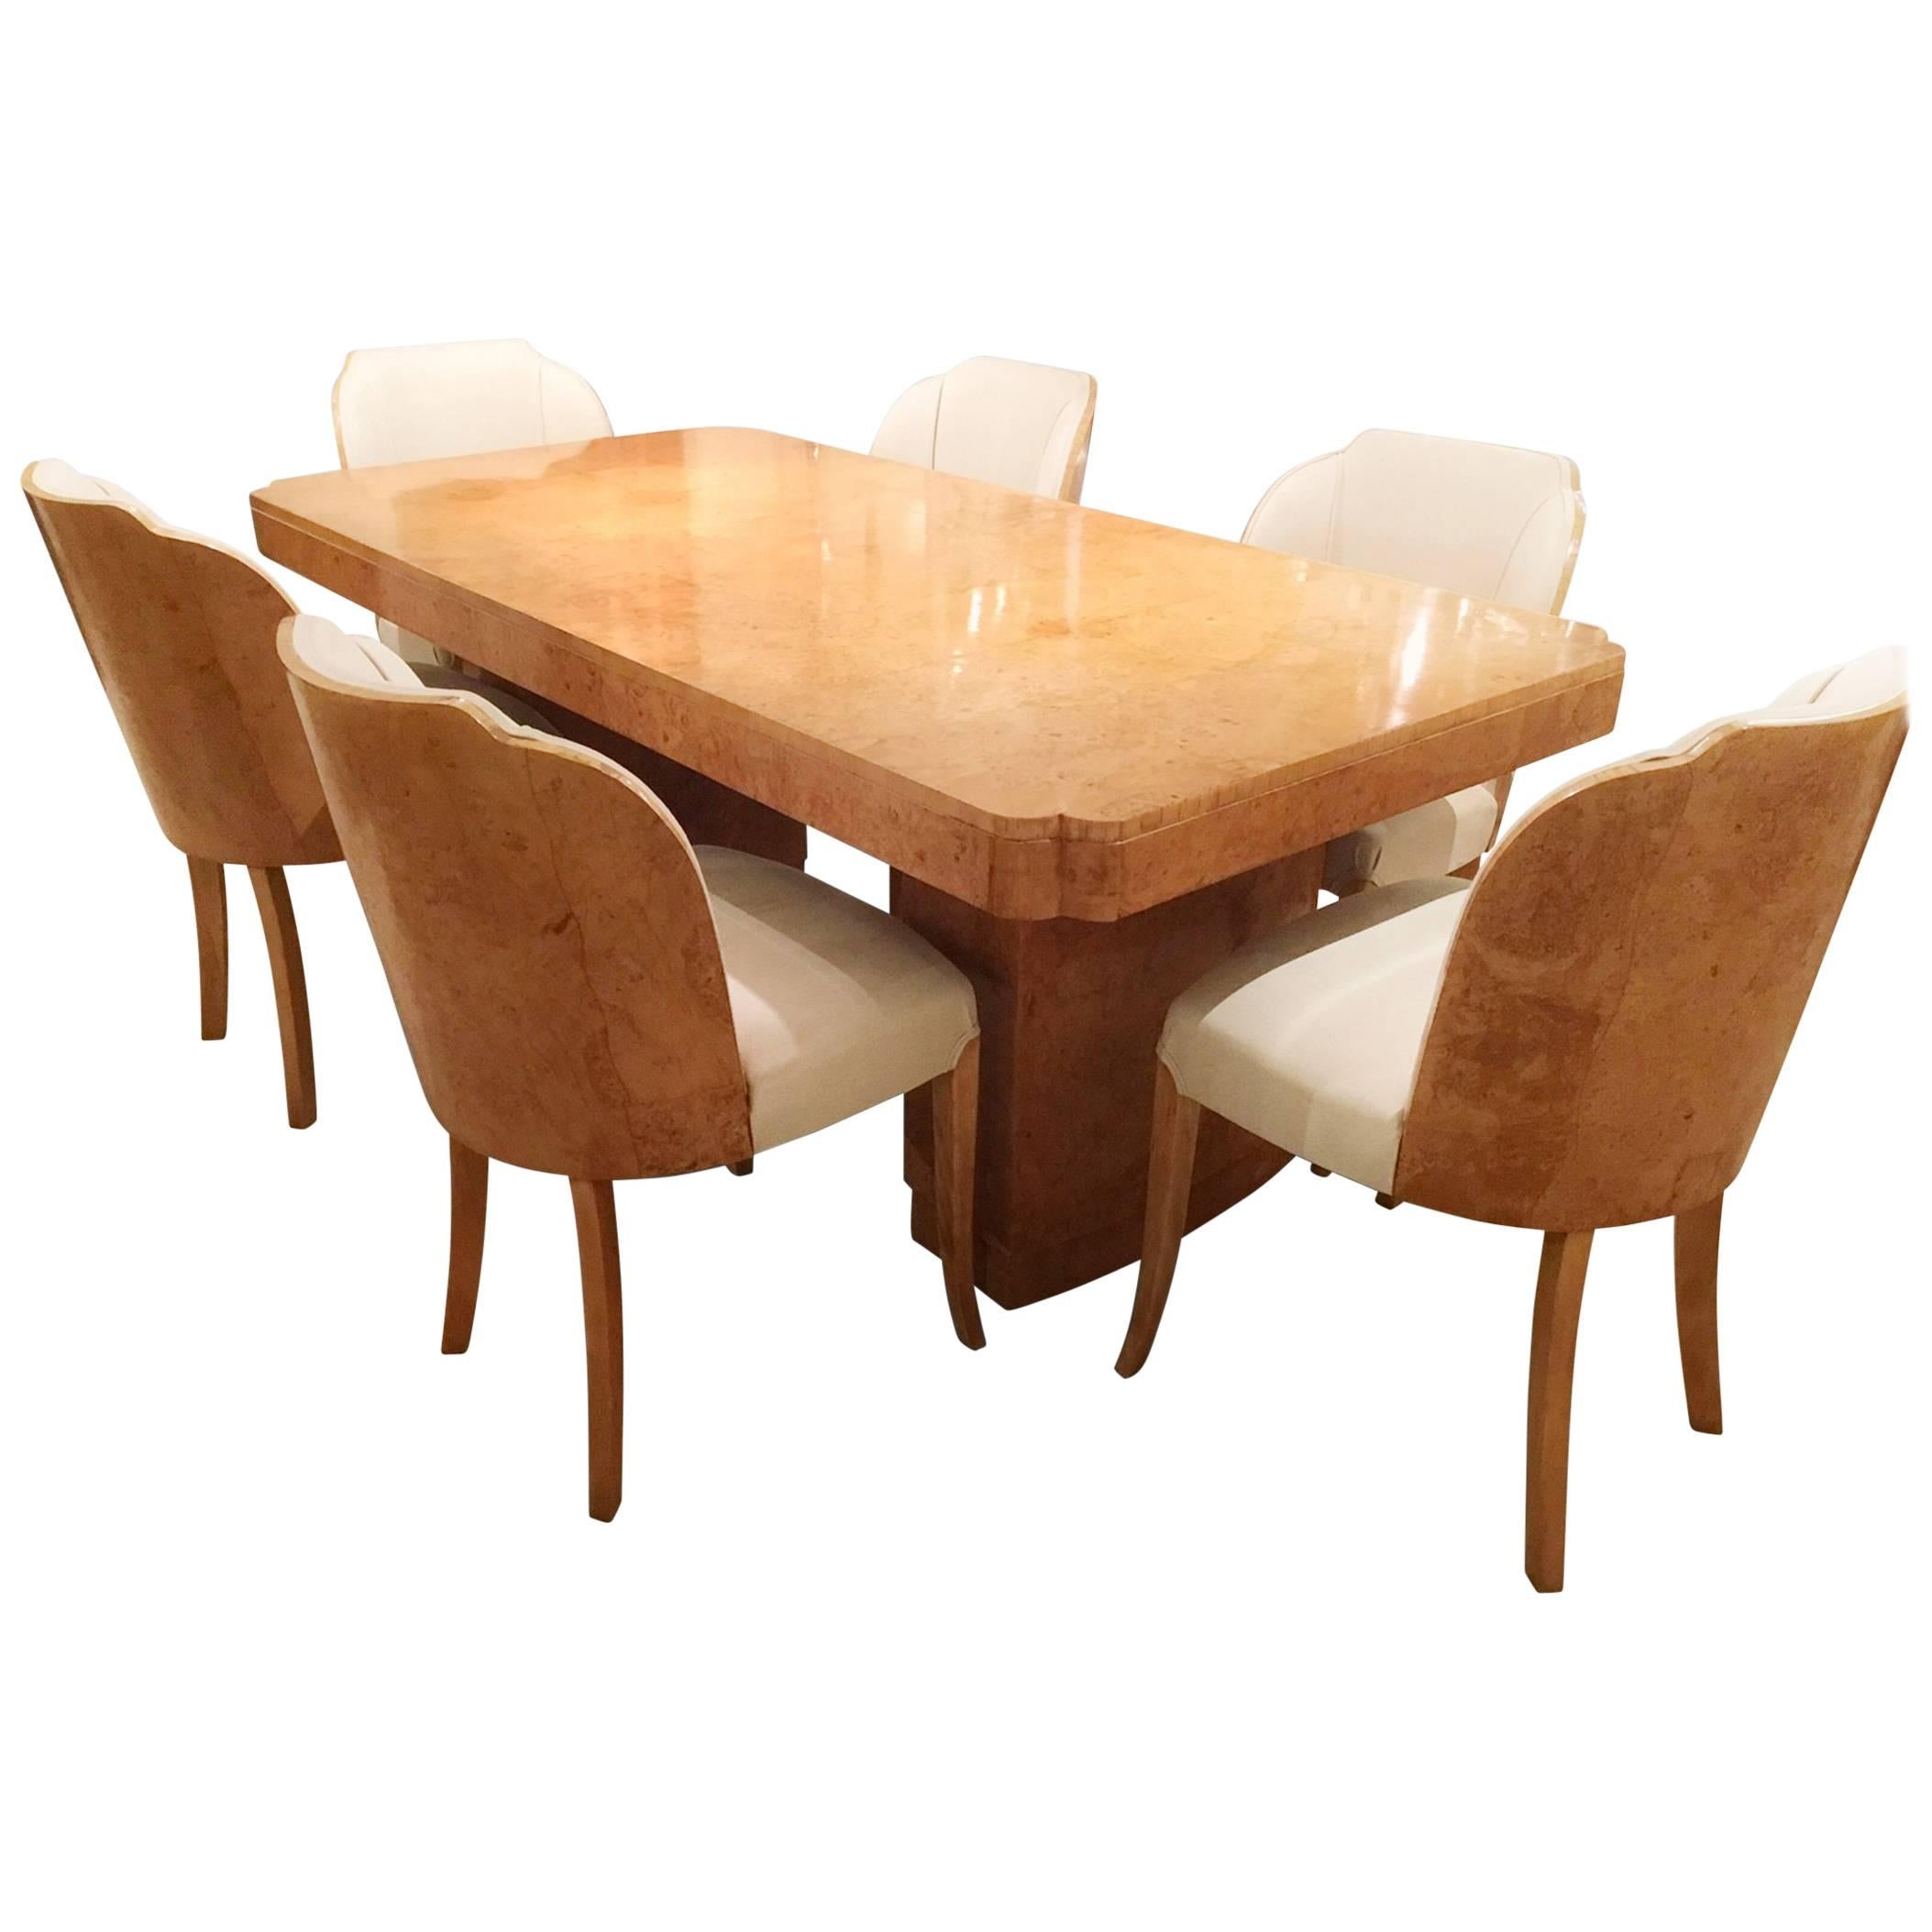 Original Art Deco Cloud Dining Table and Chairs by Epstein in Maple For Sale